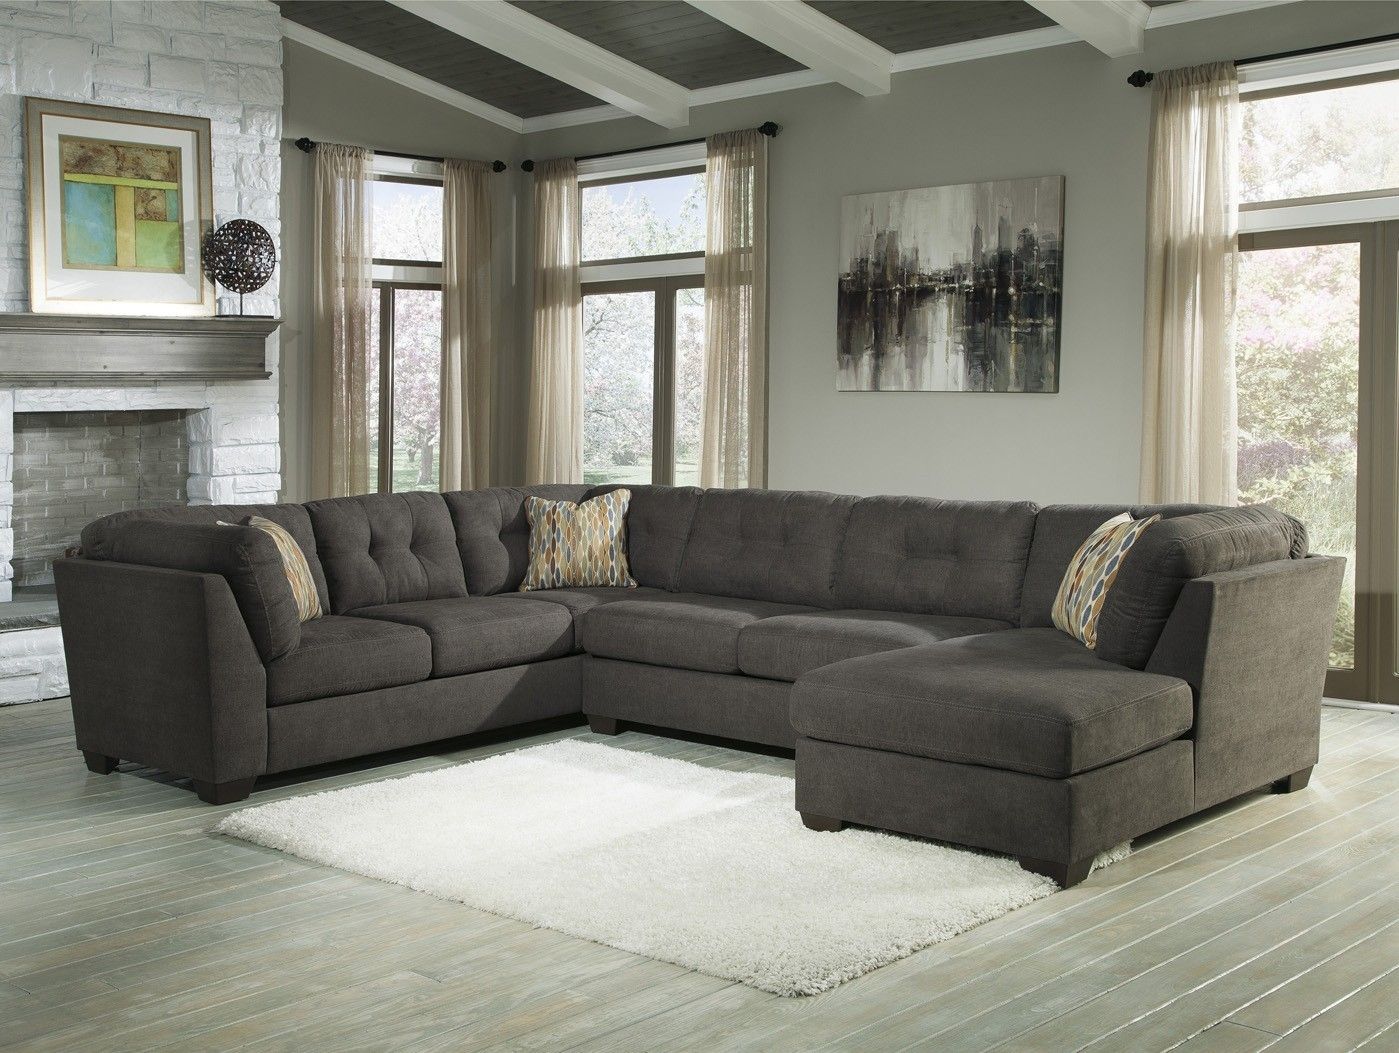 Delta City Steel 3 Piece Sectional Sofa With Right Arm Facing Chaise In Elk Grove Ca Sectional Sofas (View 6 of 10)